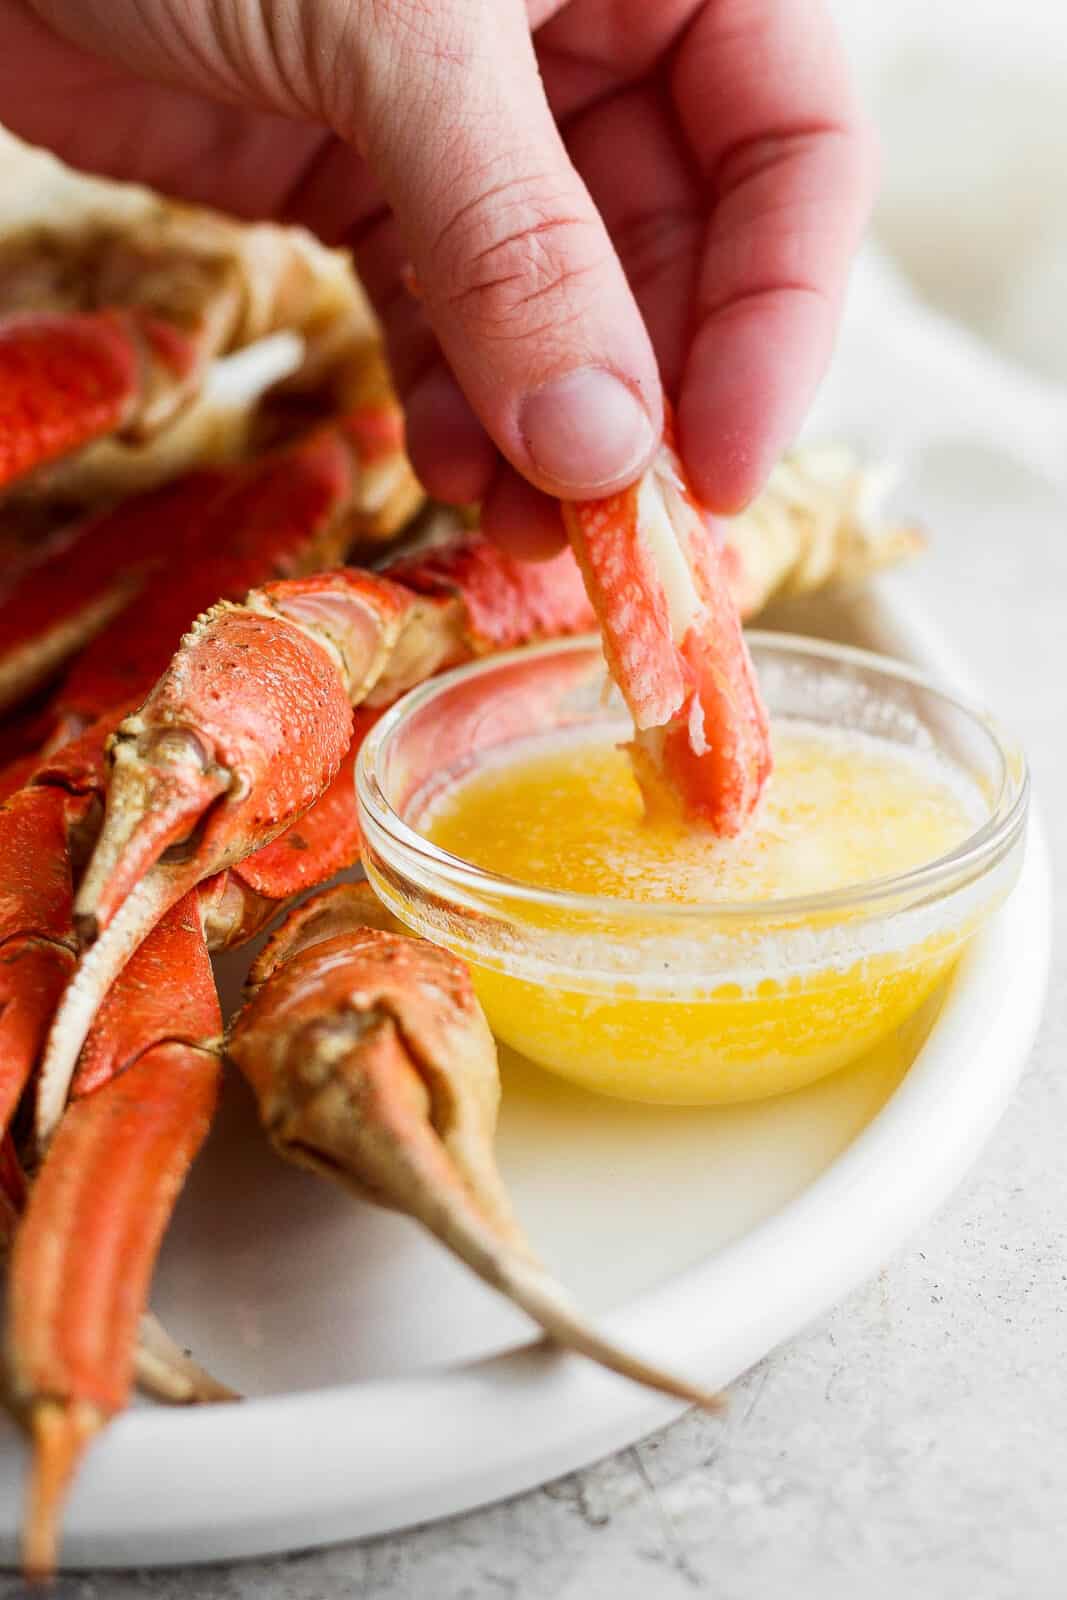 Crab meat being dipped in melted butter.